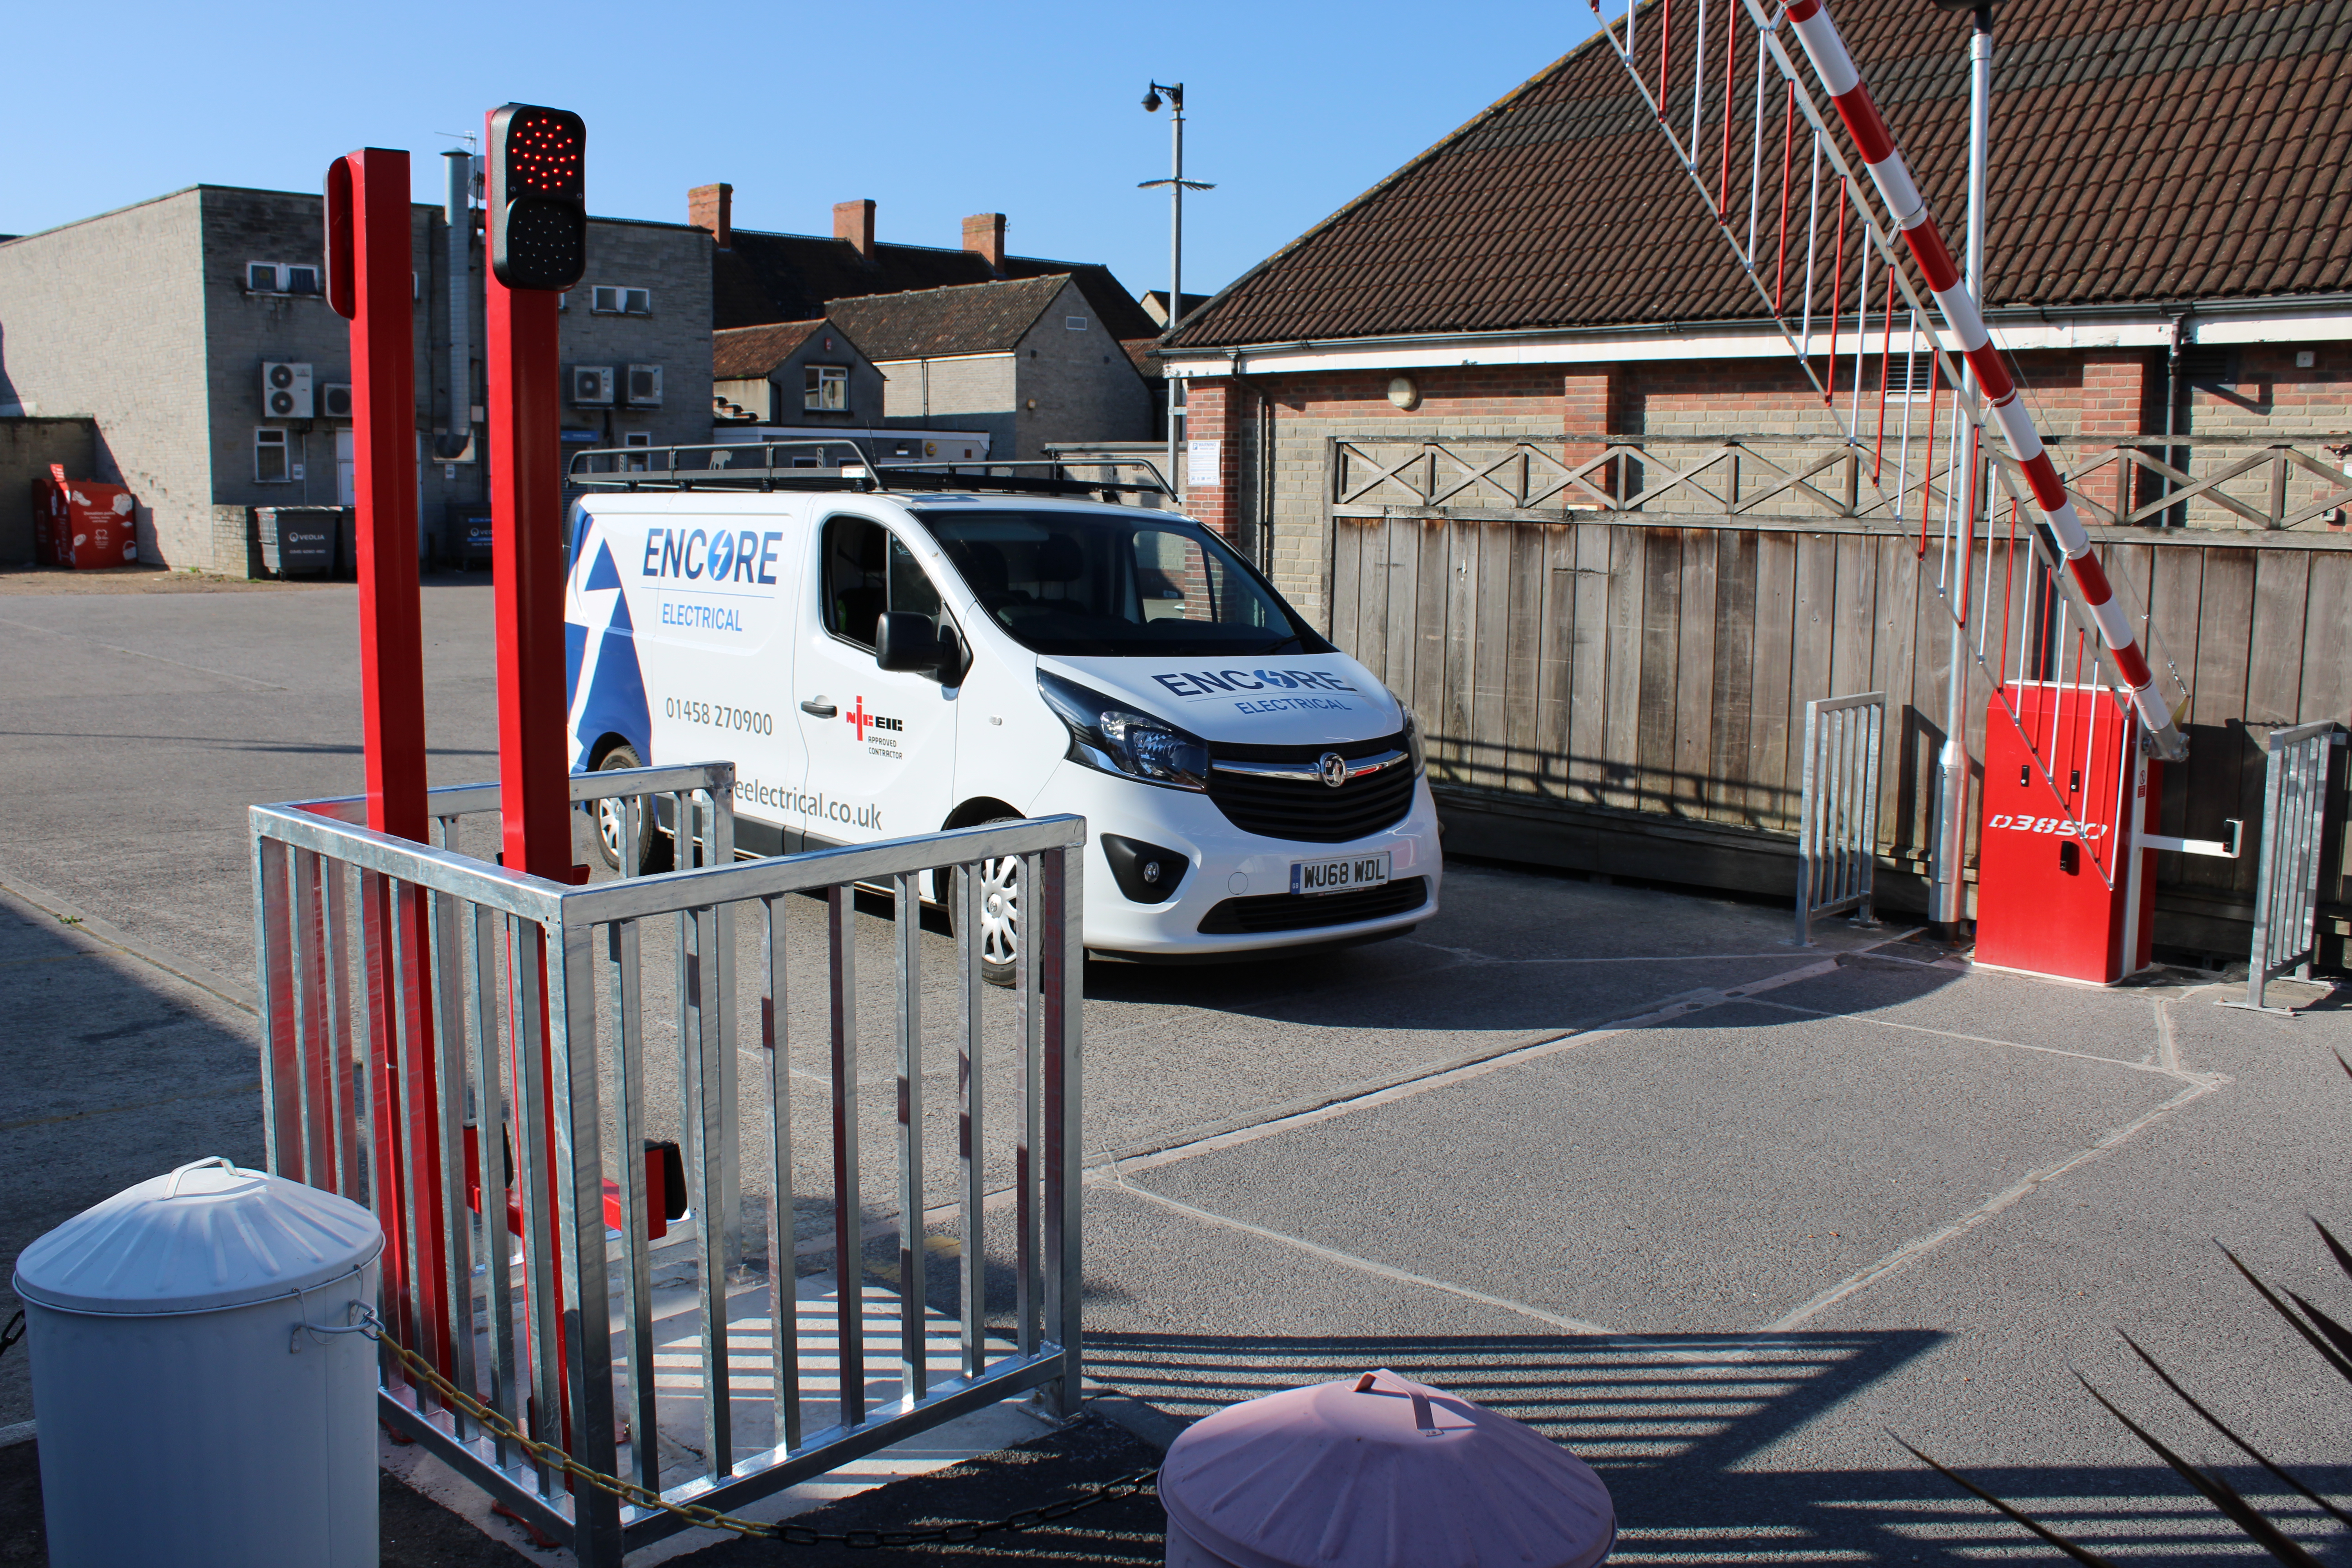 Installation of new traffic control barrier with ANPR, speech and fob access control in Somerset